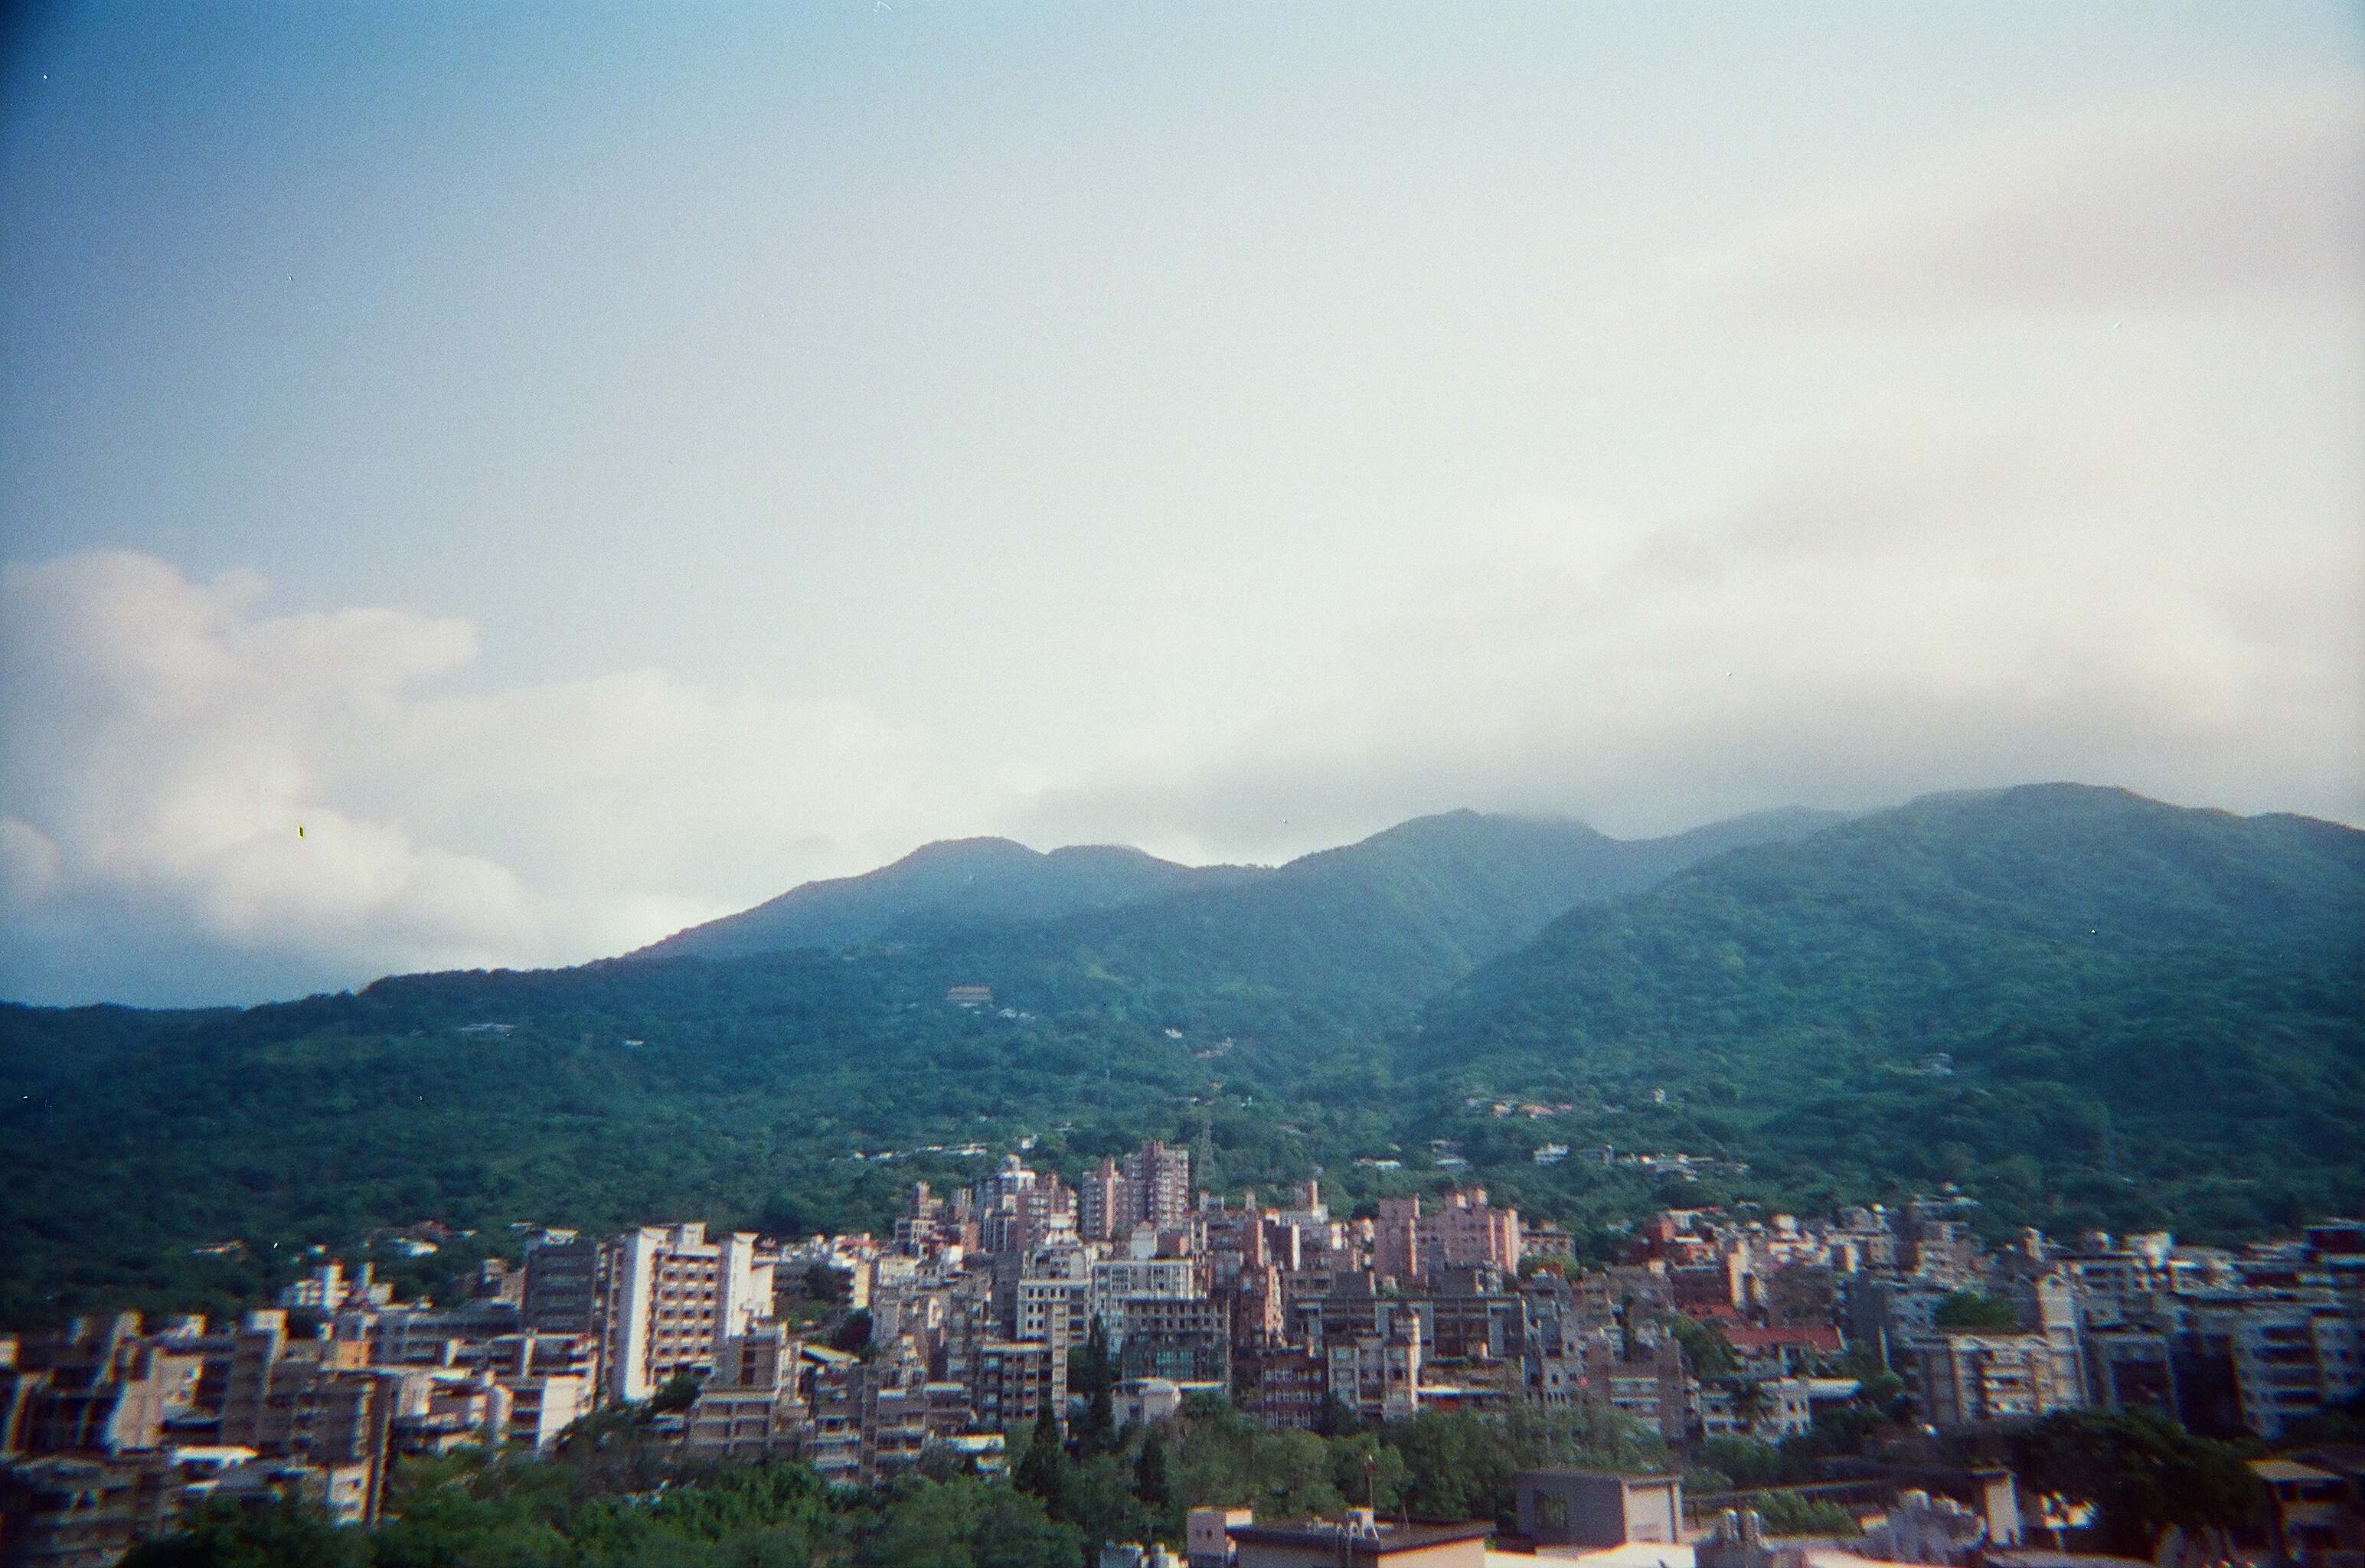 view of mountains and city-scape on a cloudy day.